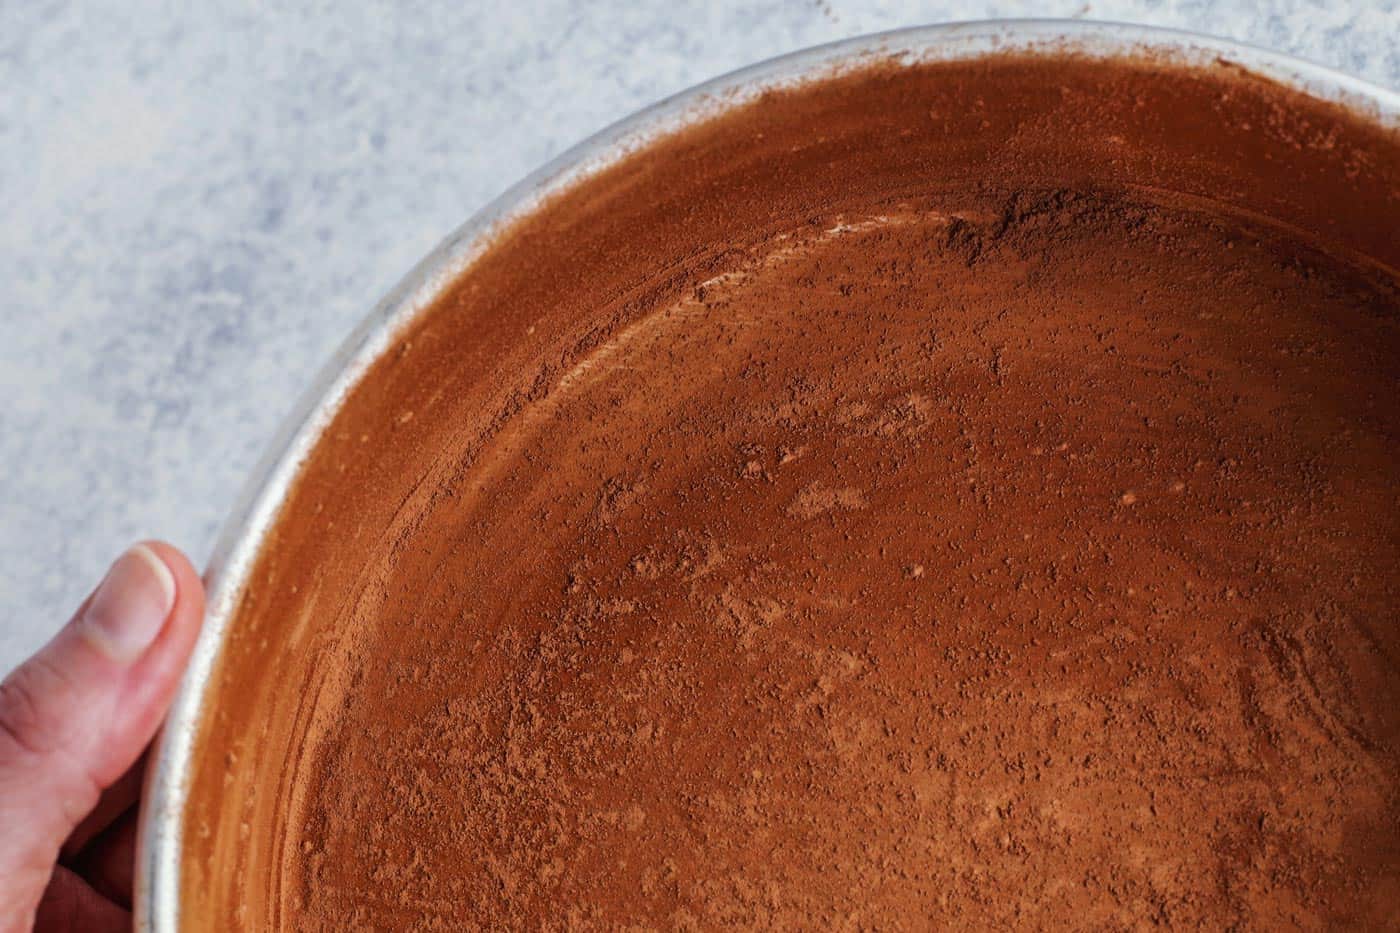 a pan that has been buttered and then dusted with cocoa powder, prepared for baking a chocolate cake